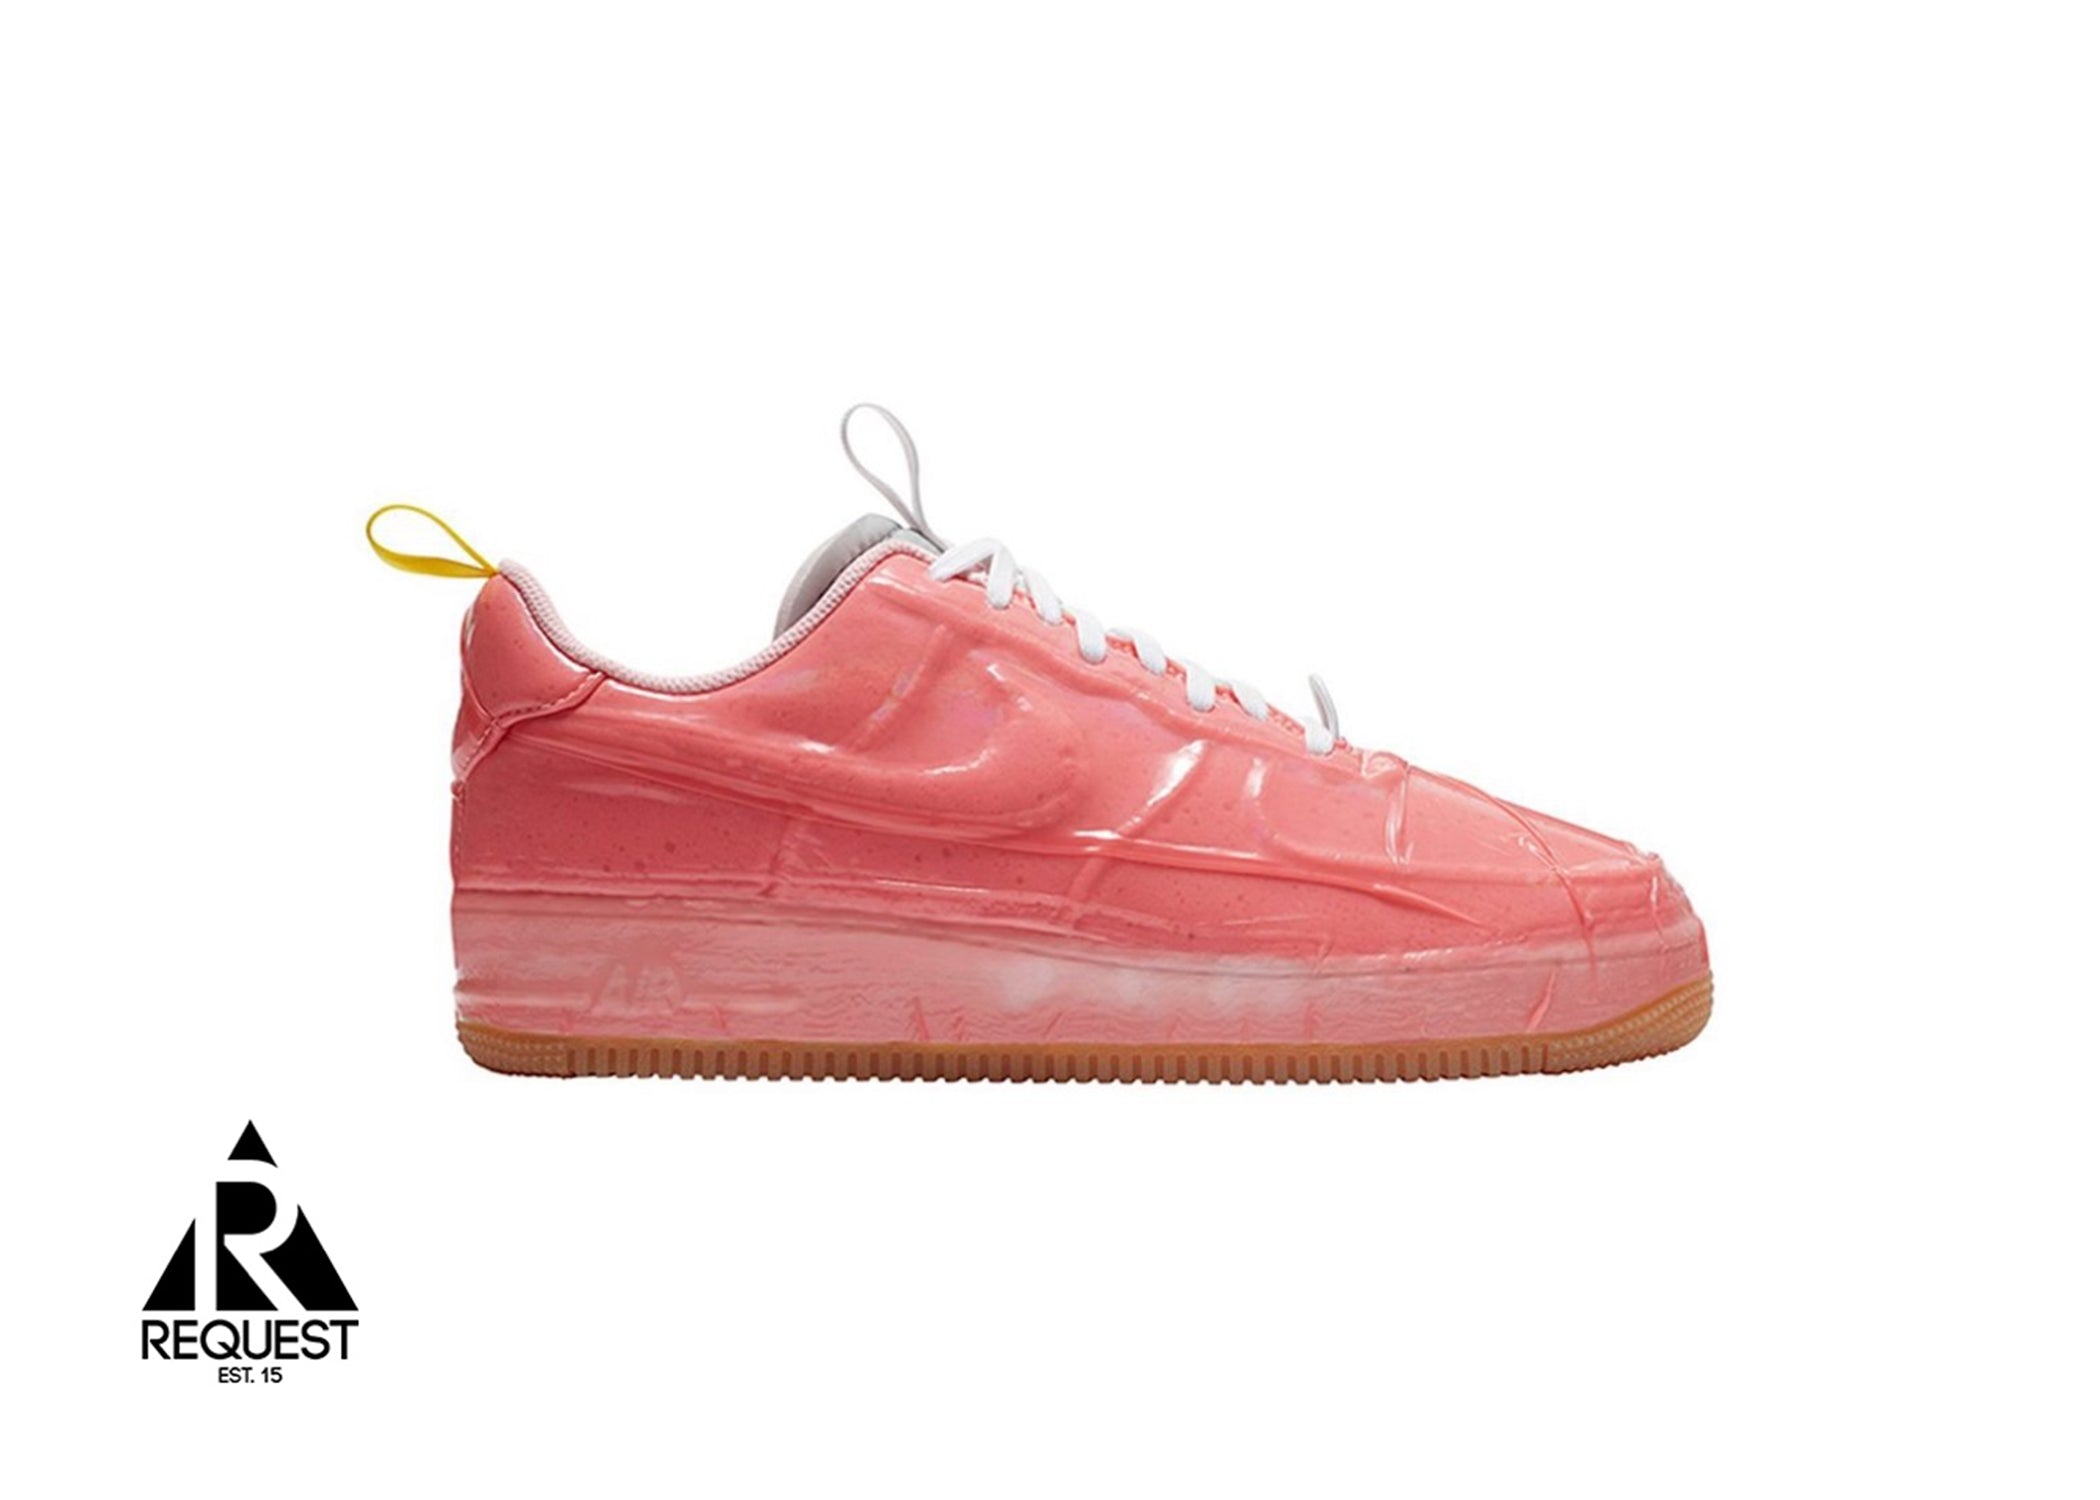 Air Force 1 Experimental “Racer Pink”